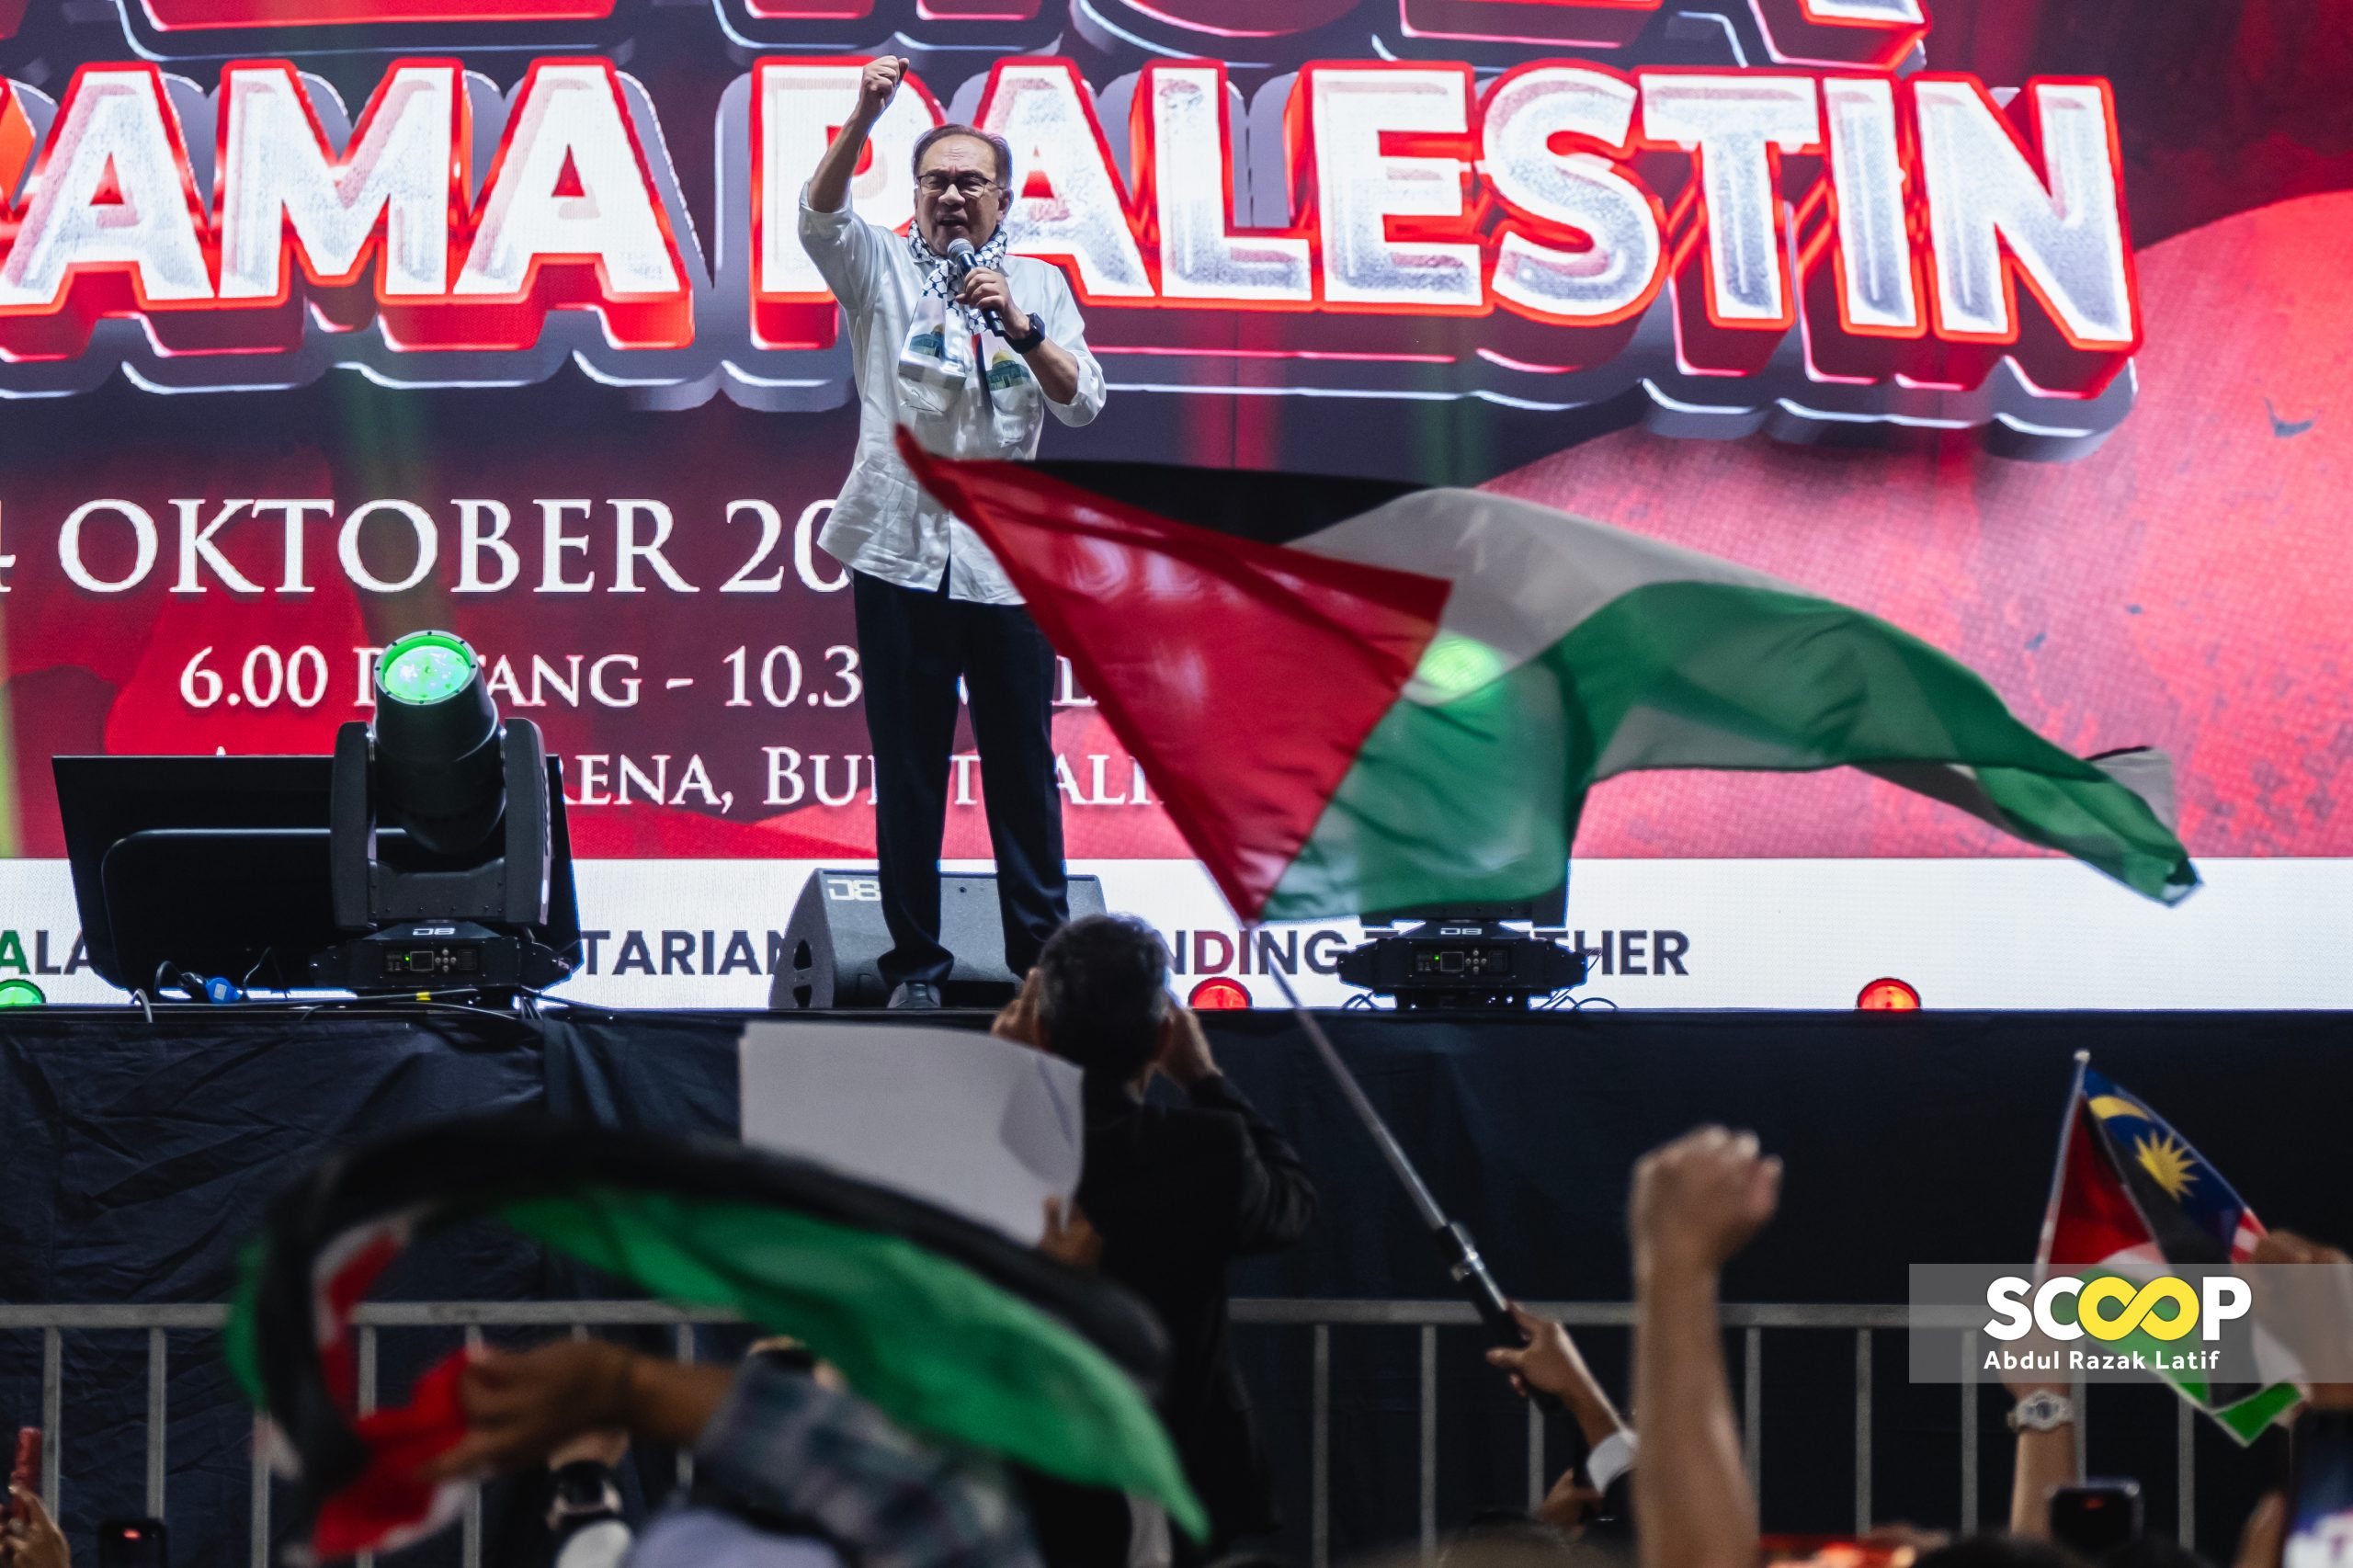 Malaysia unshaken: threats against Anwar's Palestine advocacy expected to have minimal impact, observers say